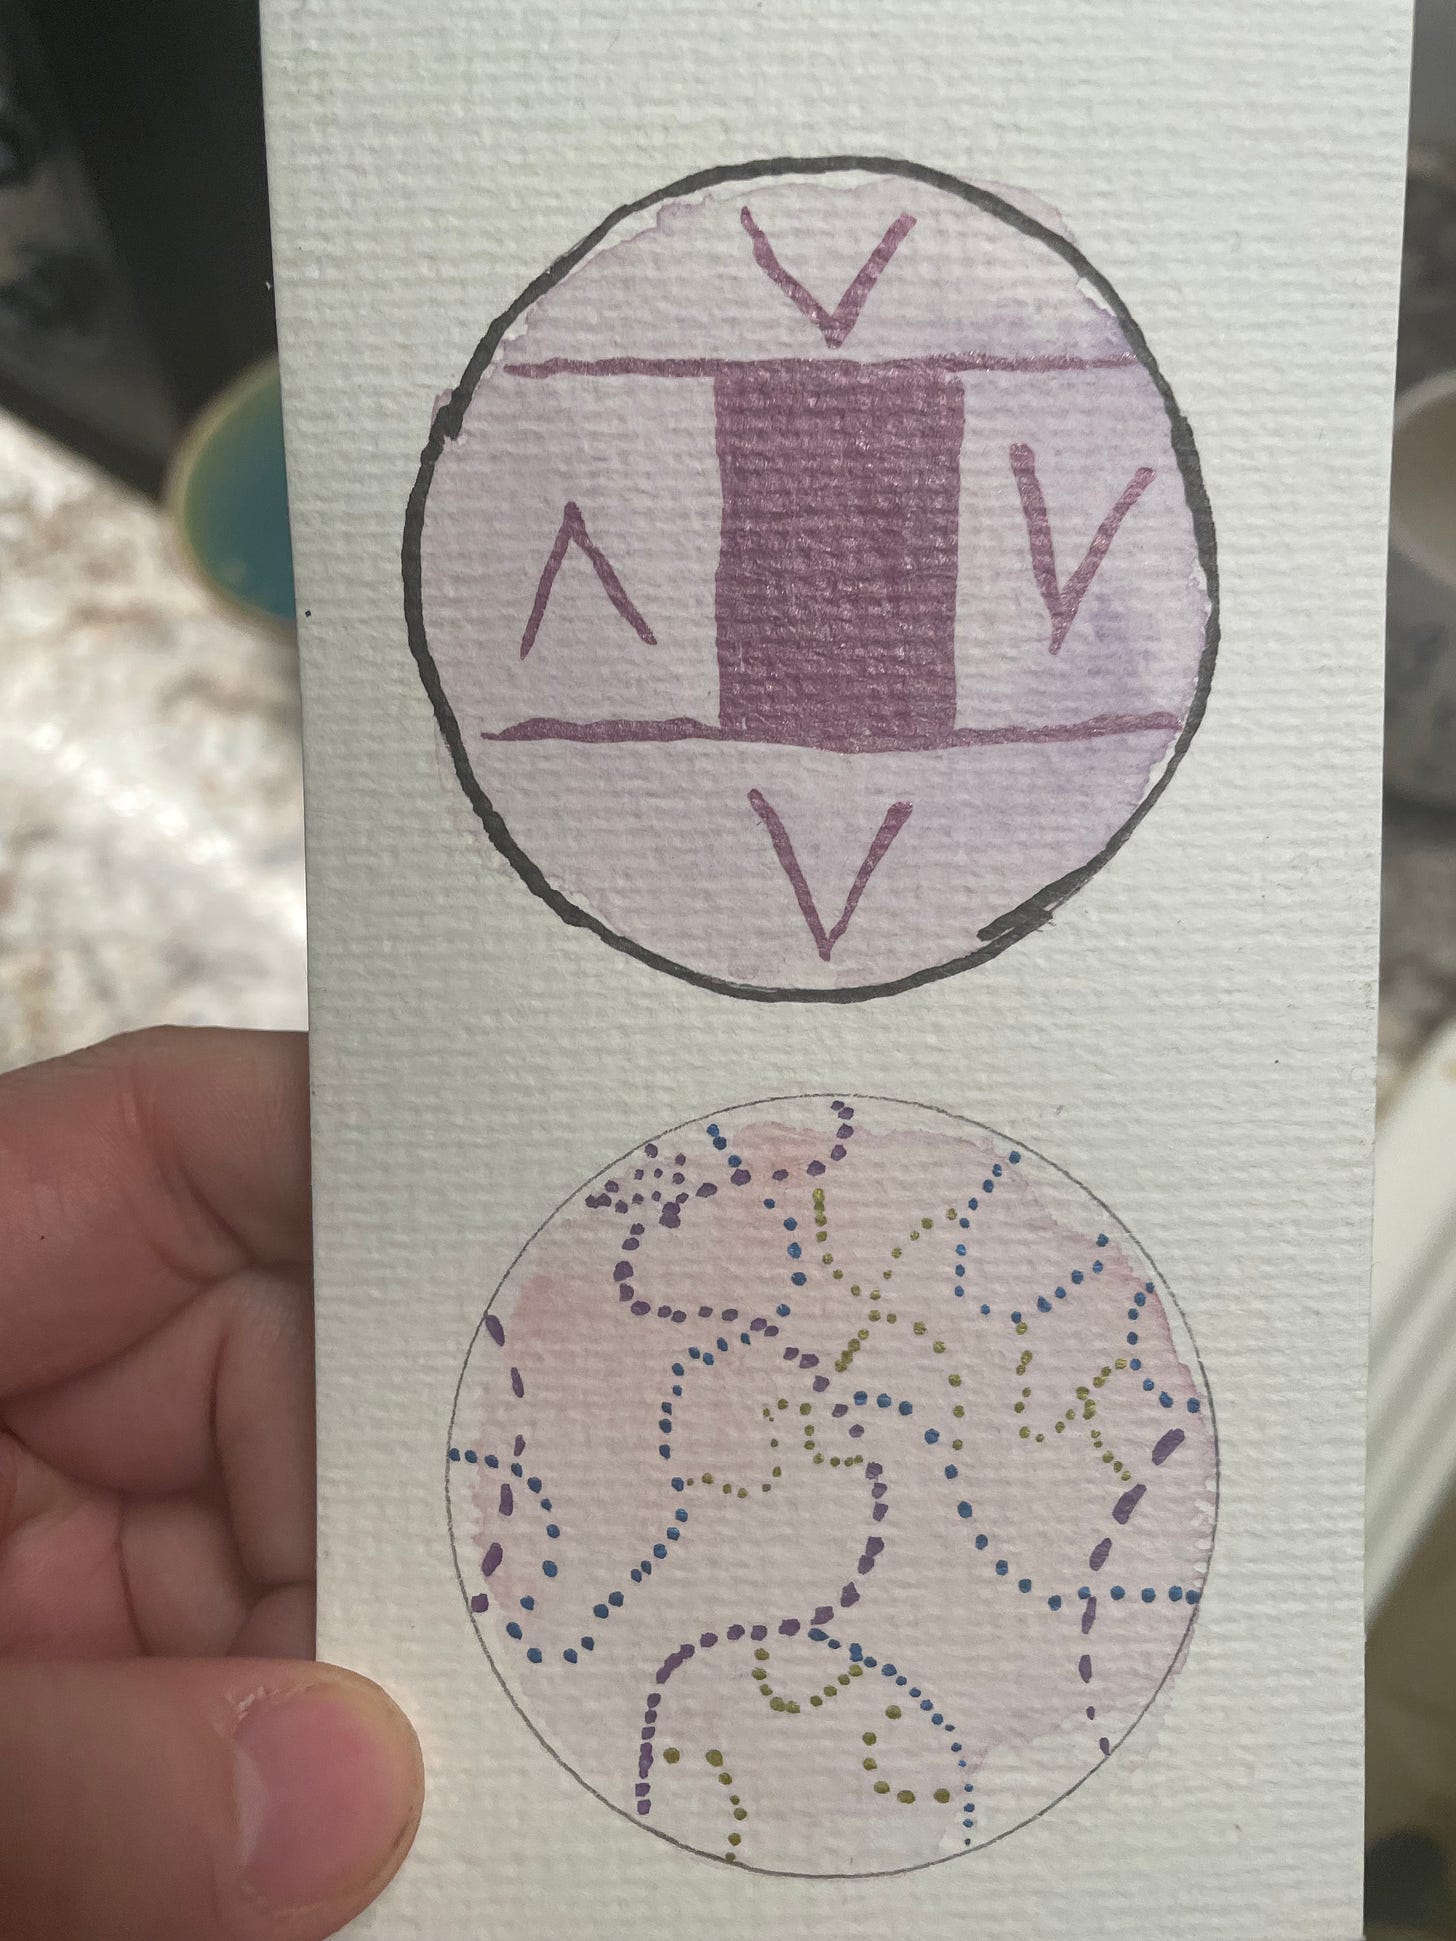 A piece of paper with 2 circles with various shades of pink and different marks on top of them